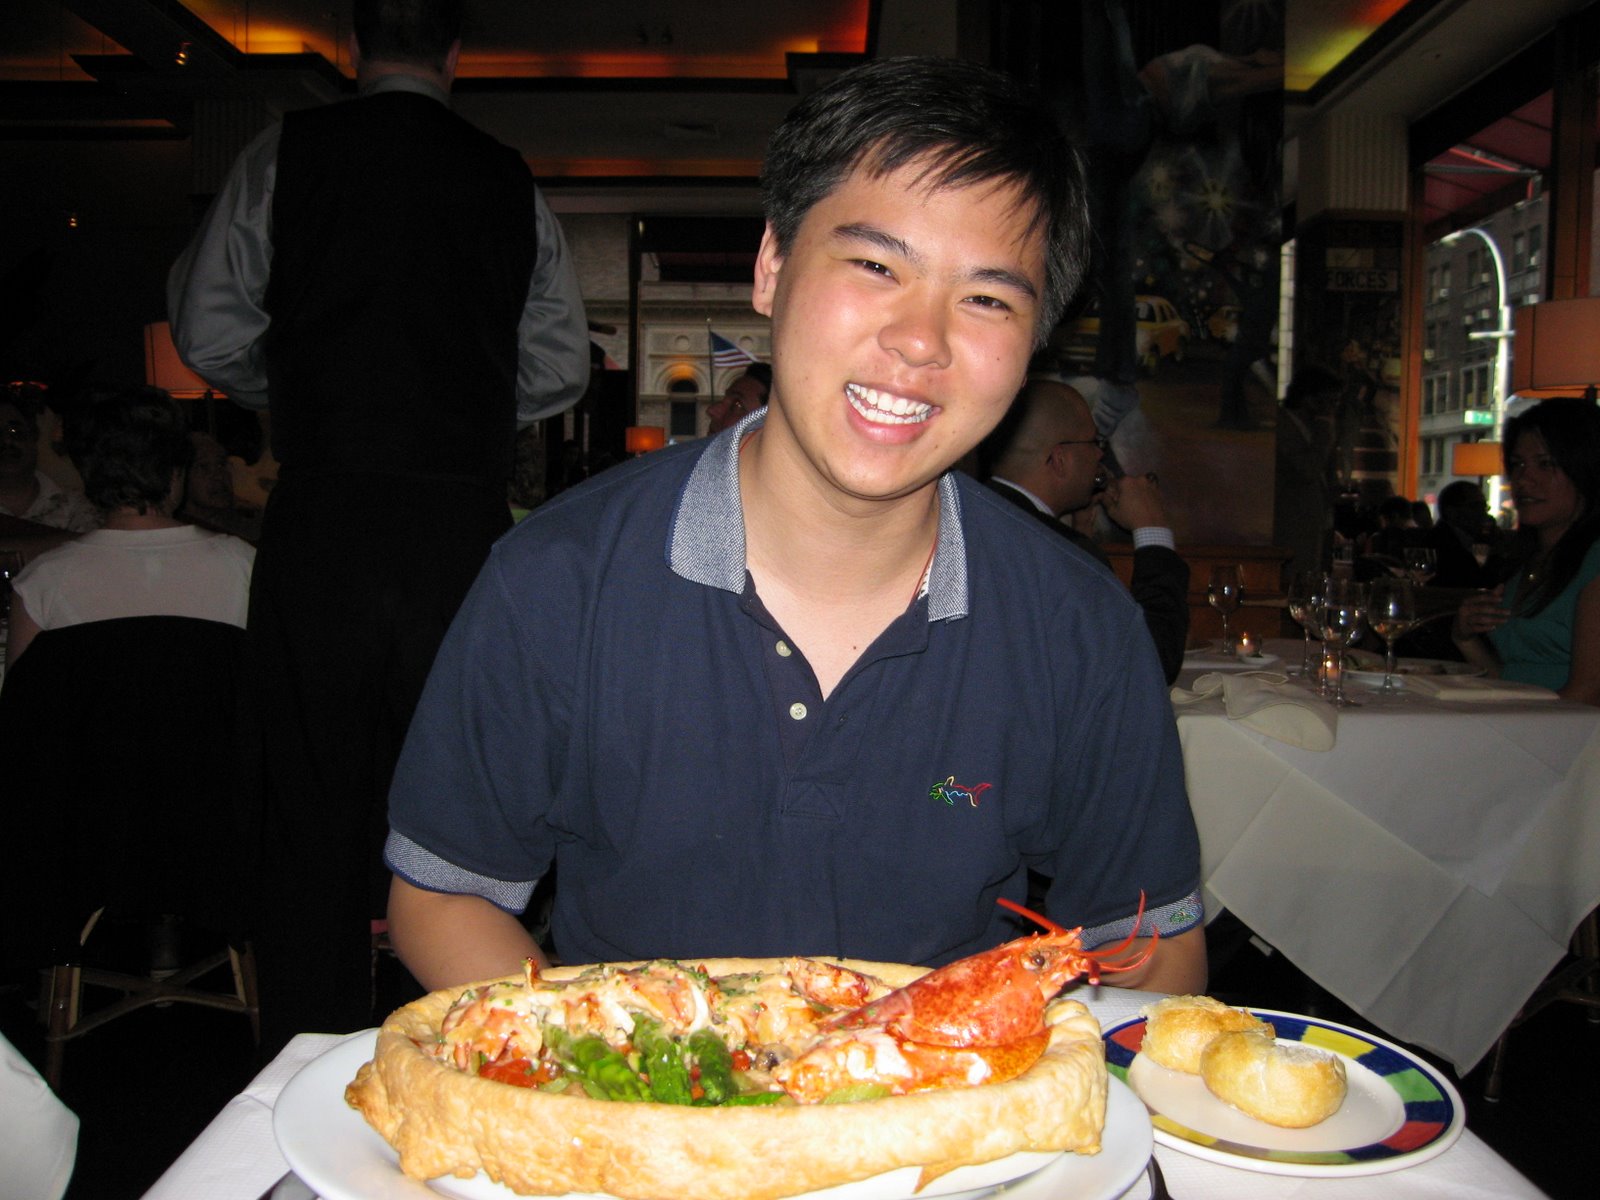 Marvin and Open-Faced 2 lb. Lobster Pot Pie filled with lobster, asparagus and mushrooms